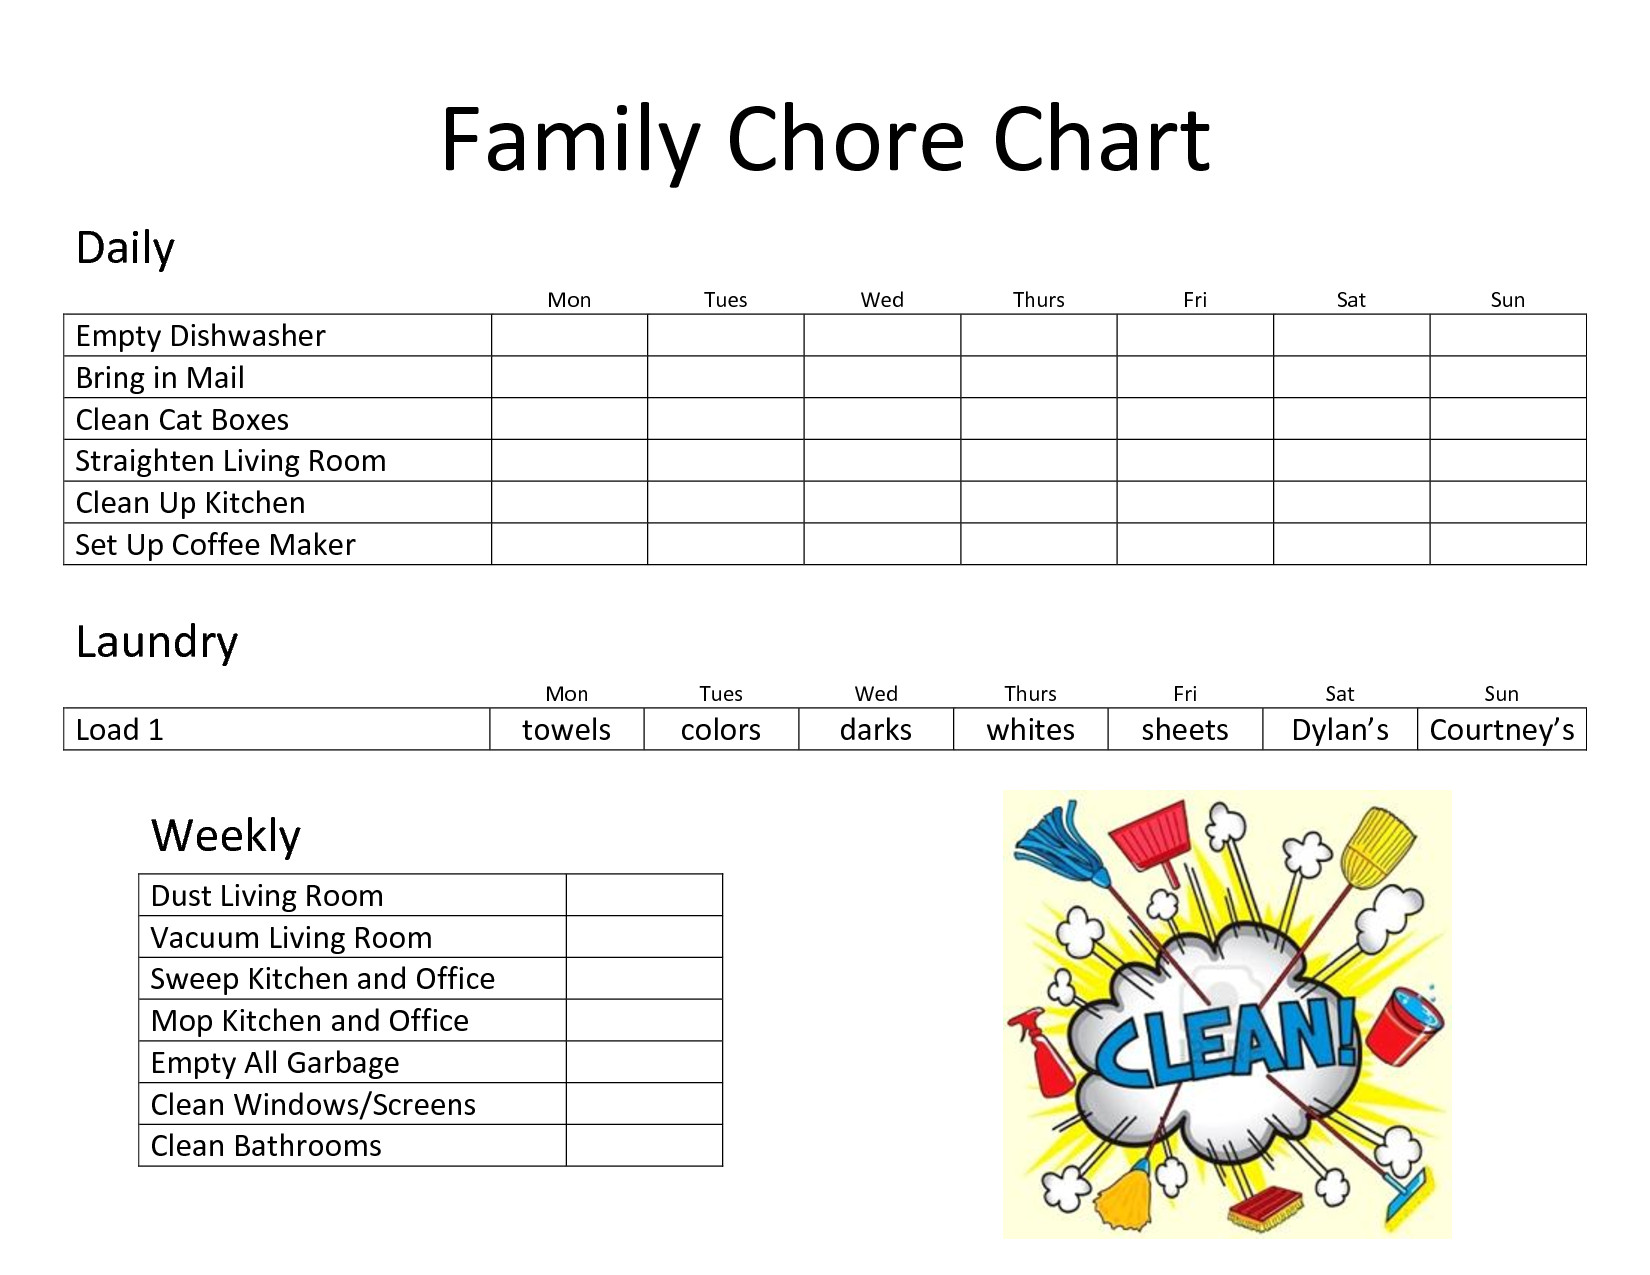 Daily Chore Chart Template Daily Family Chore Chart Template Chore Charts